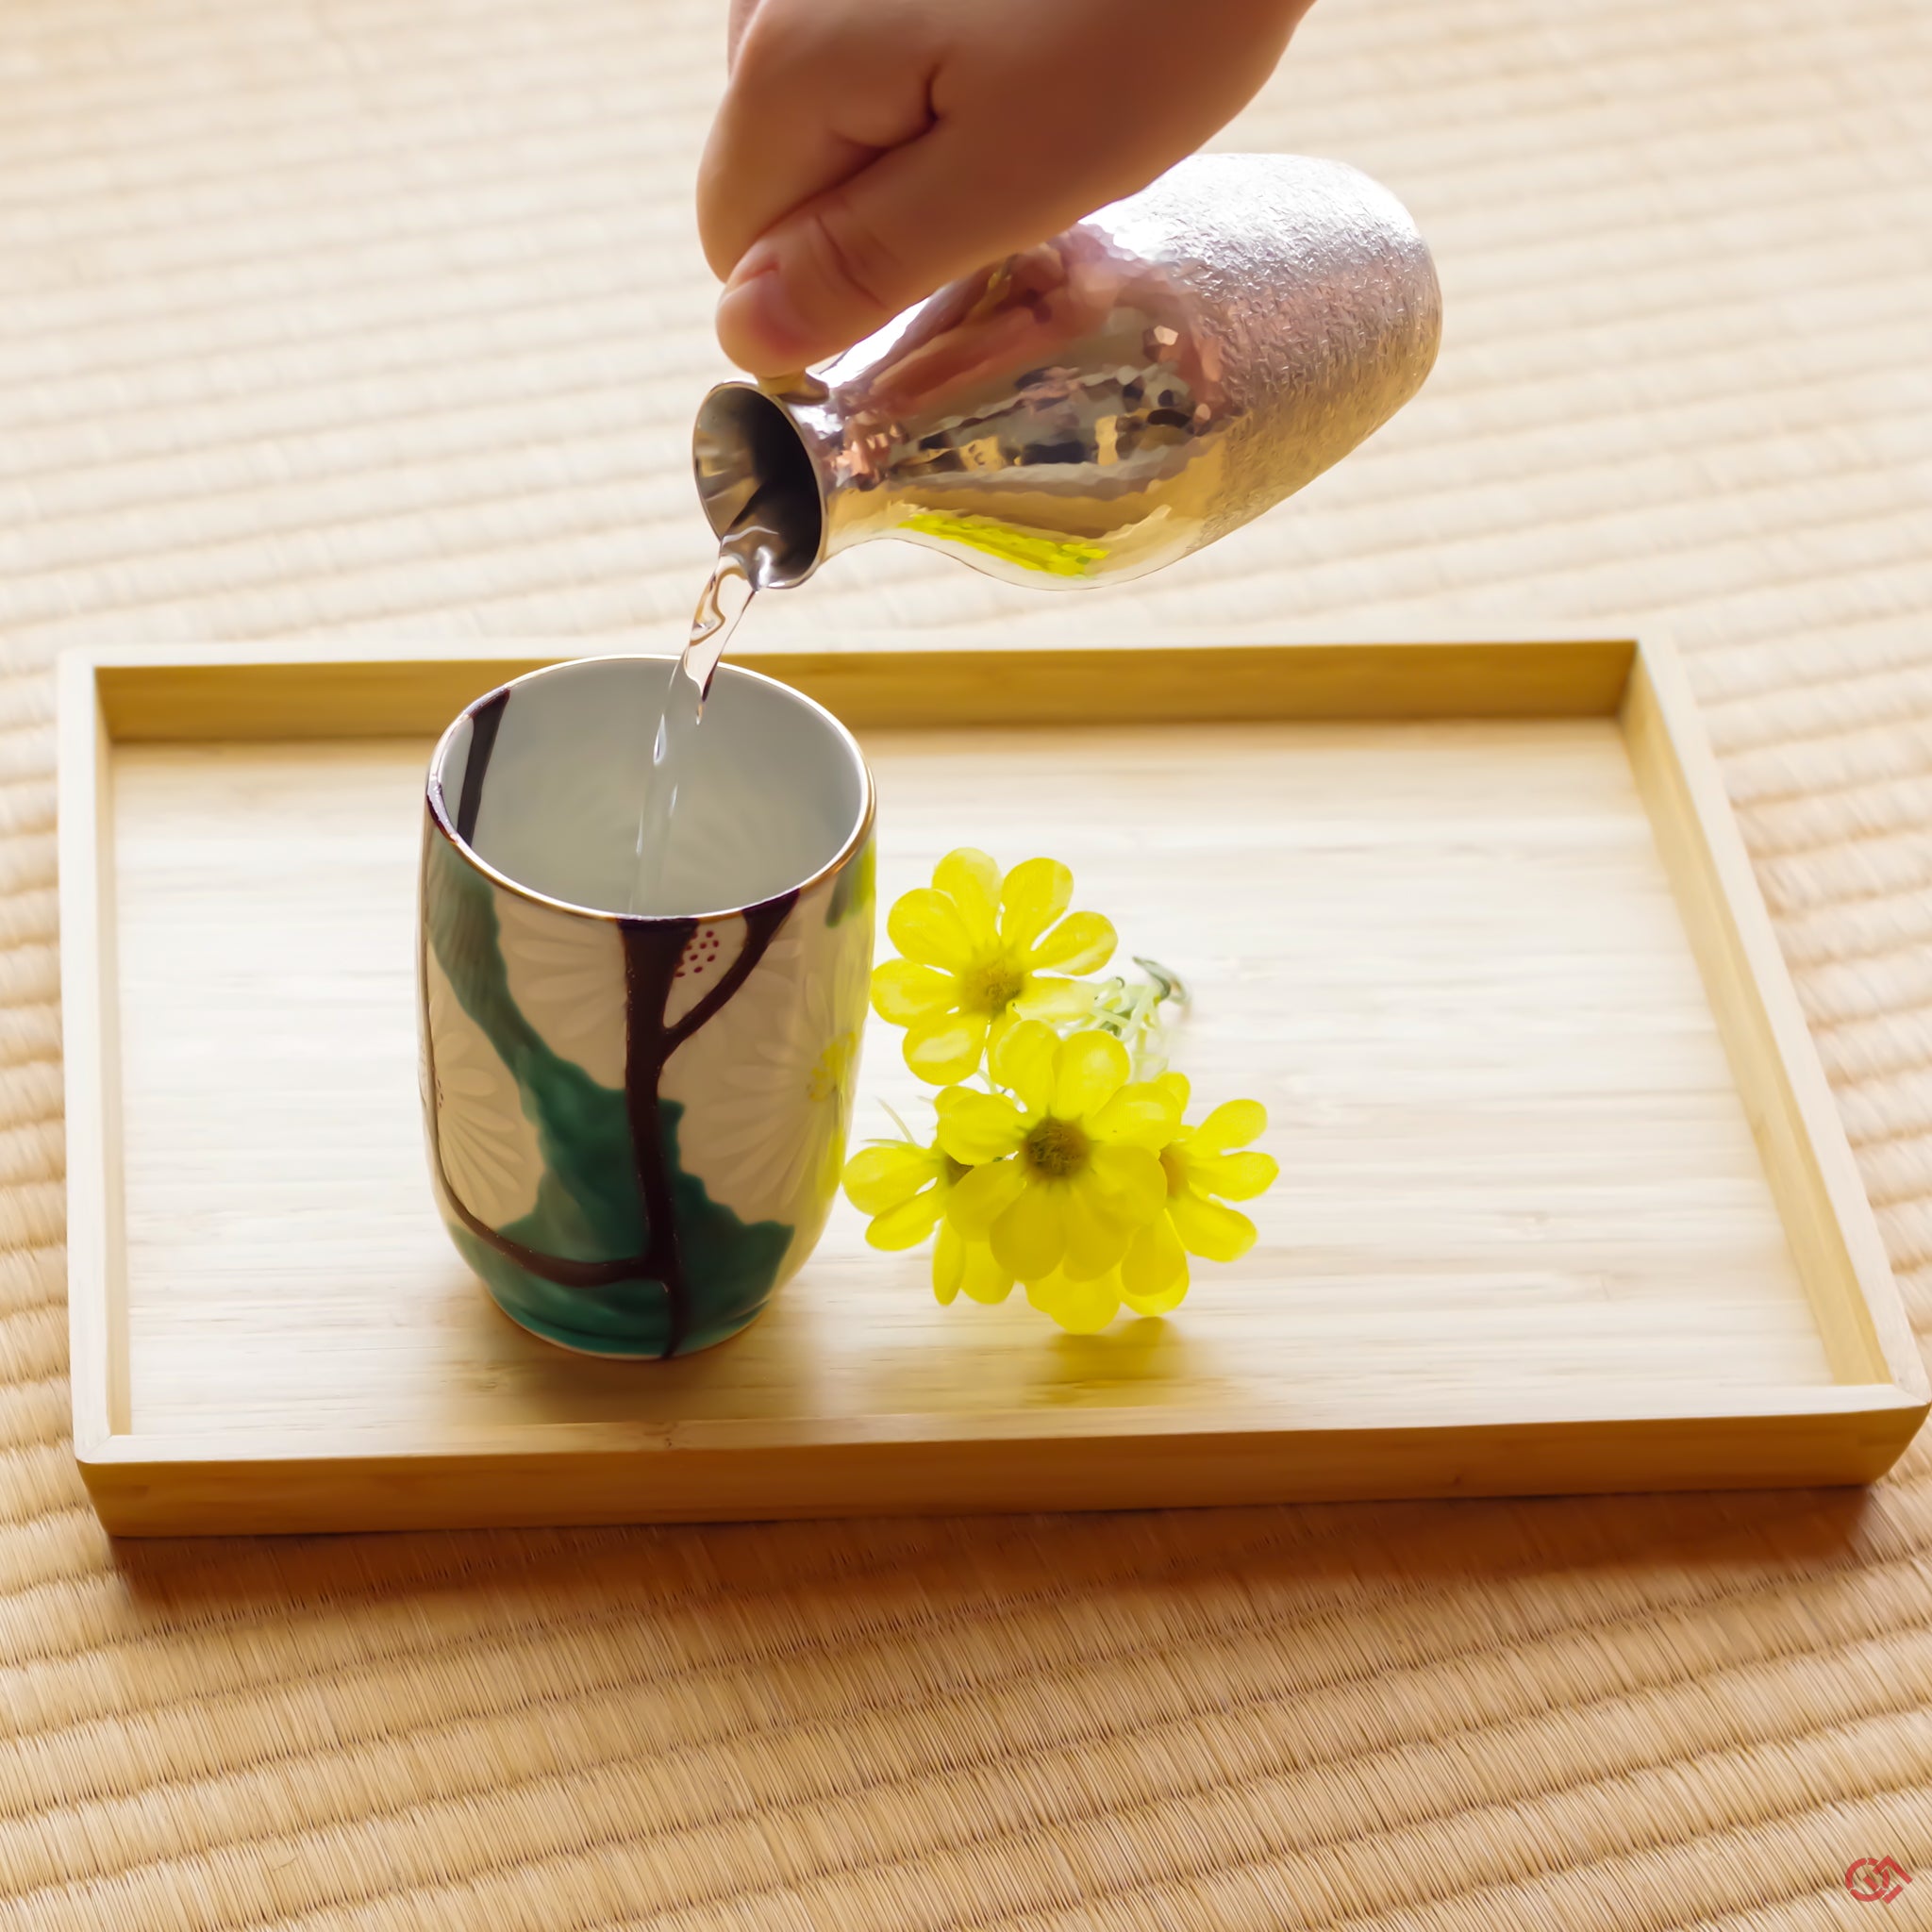 A photo of an authentic Kintsugi pottery piece being used in a real-world setting, such as a cup of sake being poured into a Kintsugi teacup.